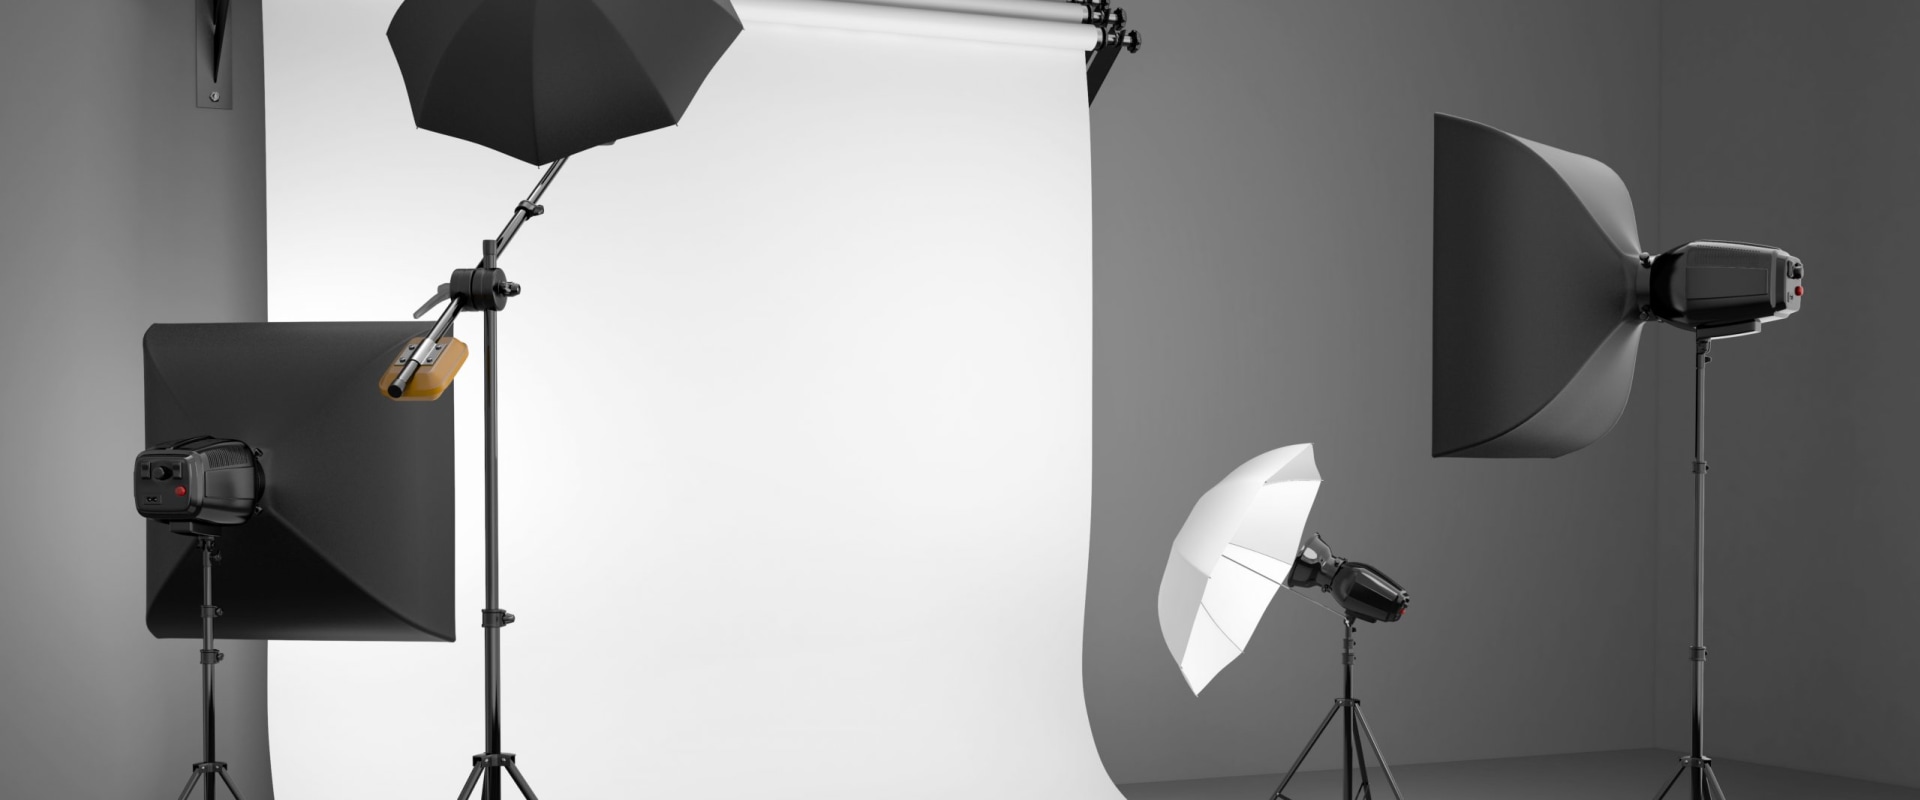 Tips for Product Photographers: What Types of Backgrounds to Avoid